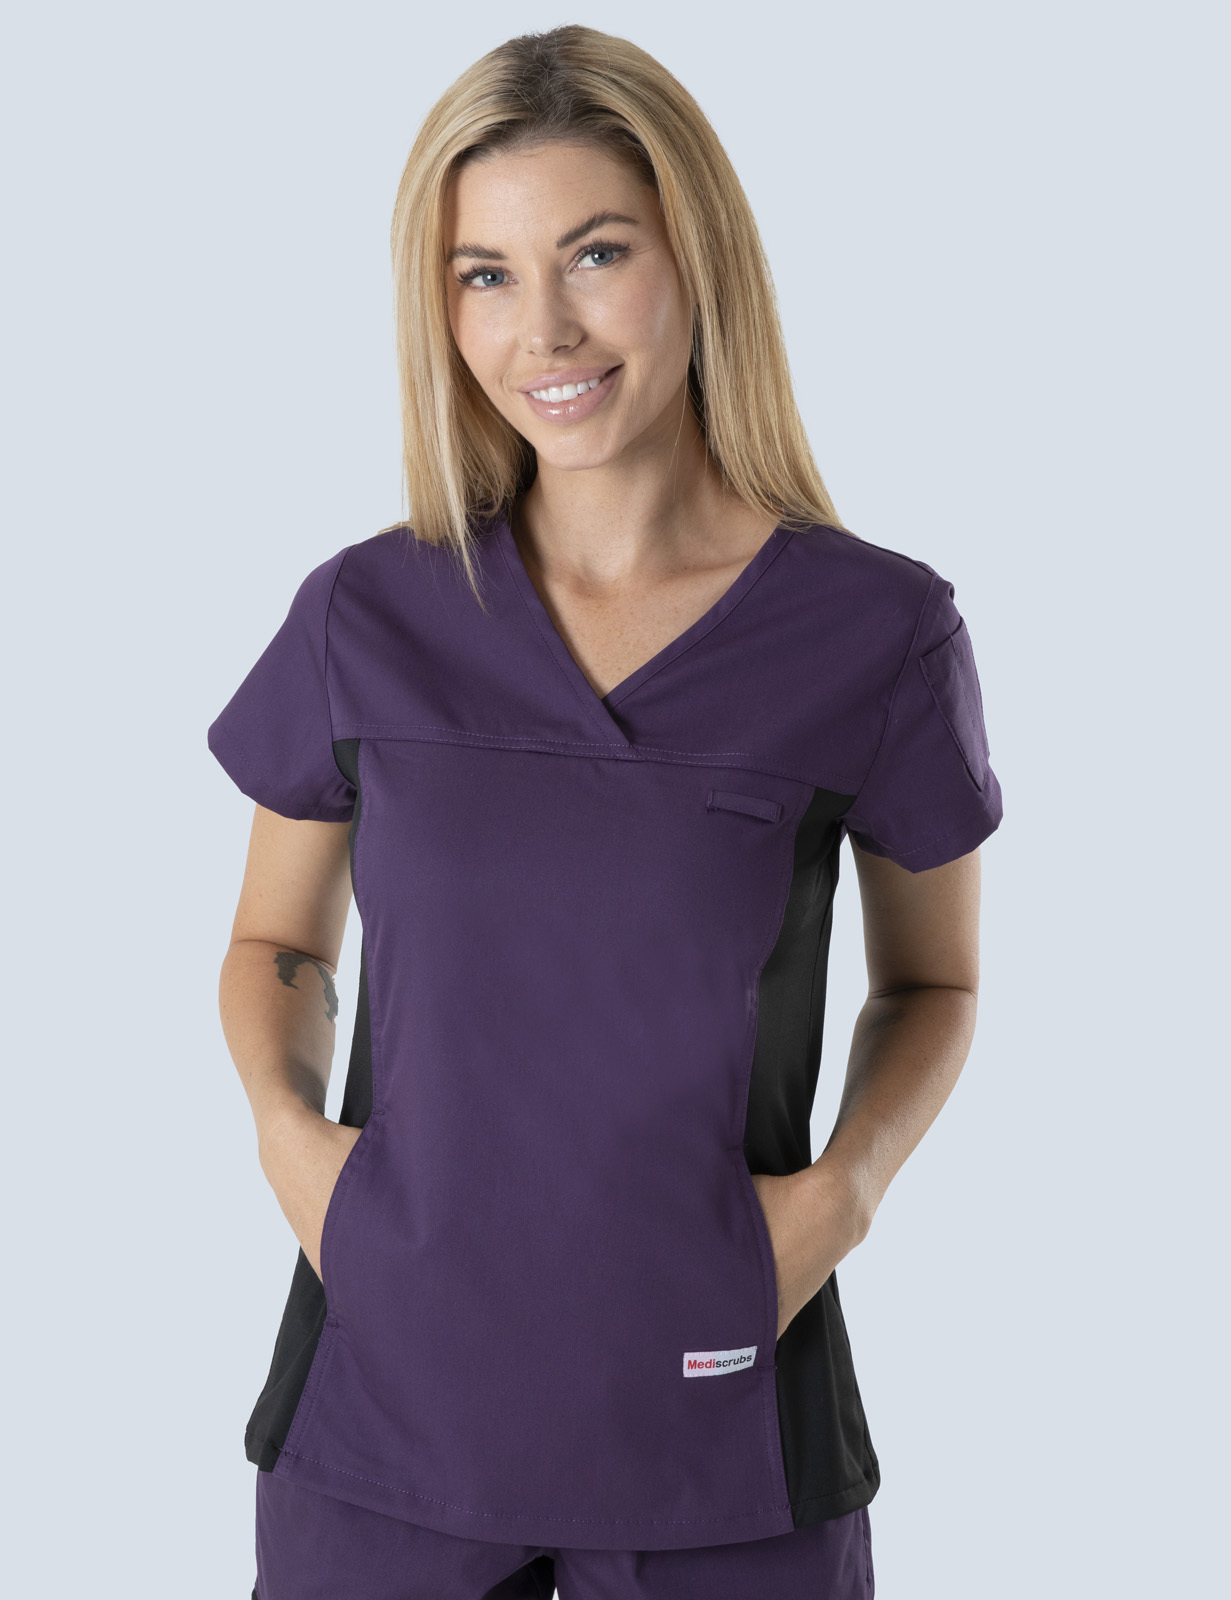 Tweed Hospital Pharmacy - PHARMACY ASSISTANT - Aubergine Women's Fit Solid Scrub Top with Spandex Panel